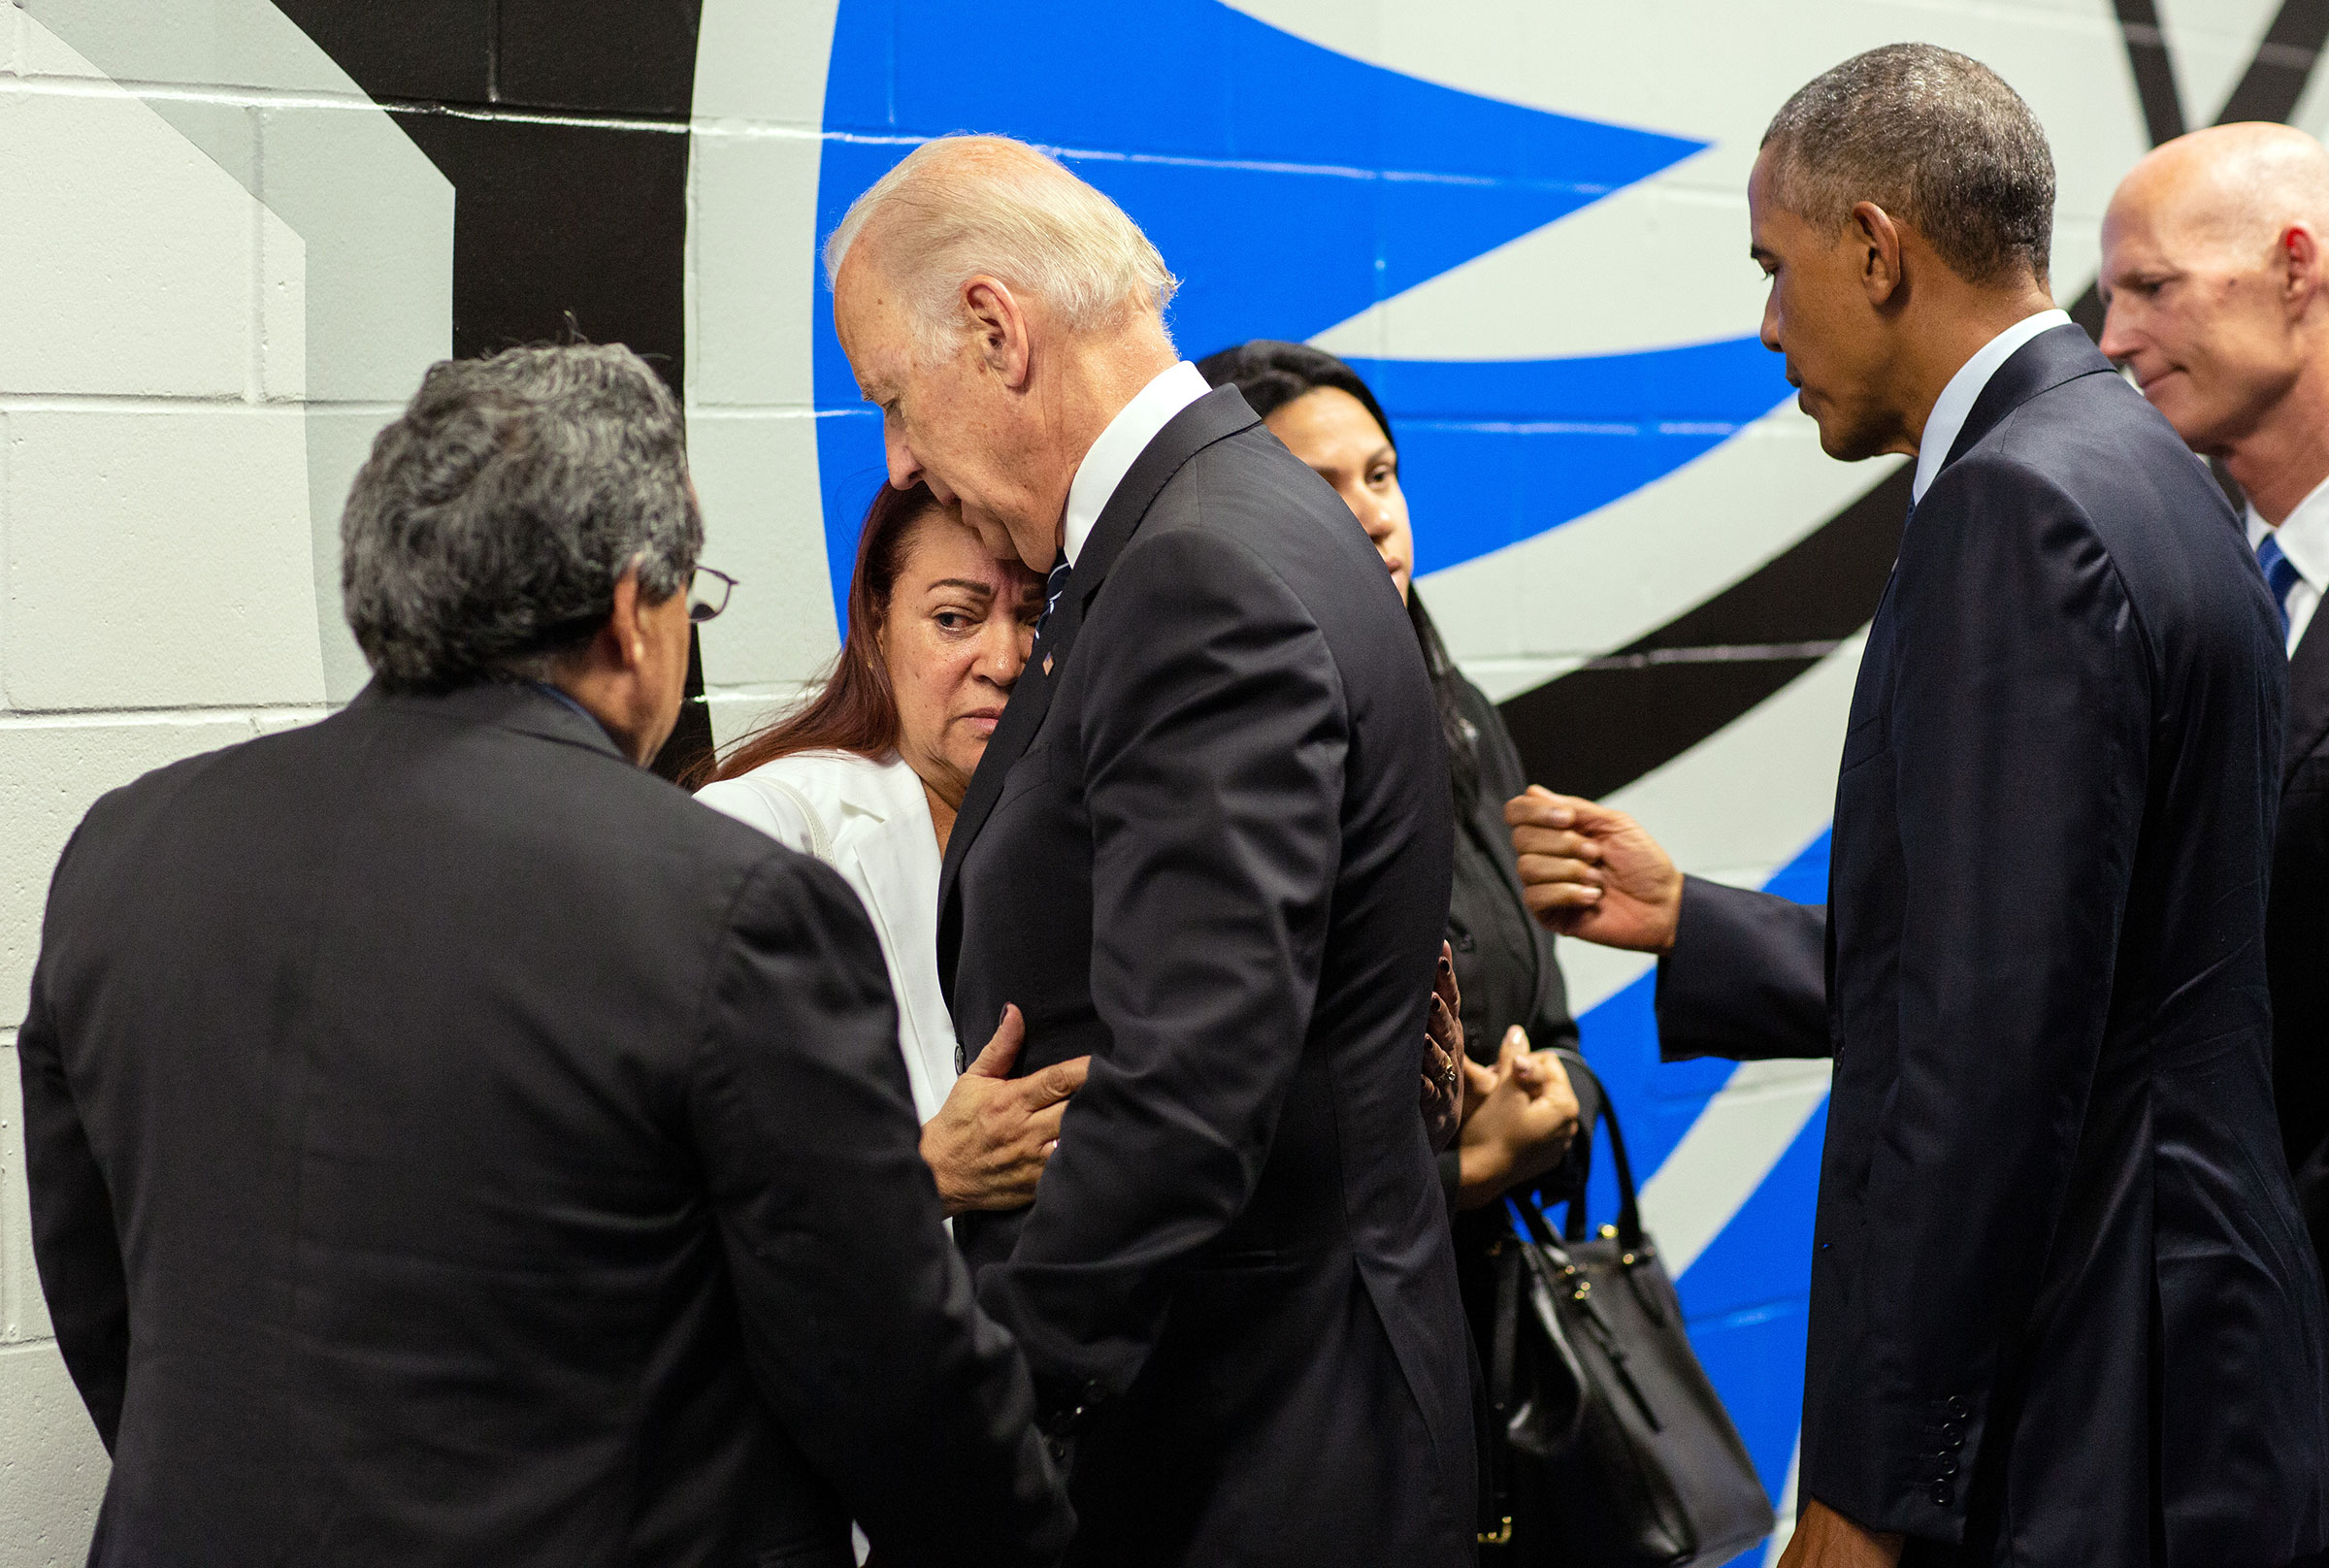 President Barack Obama and Vice President Joe Biden arrive at the Amway Center in Orlando, on June 16, 2016.